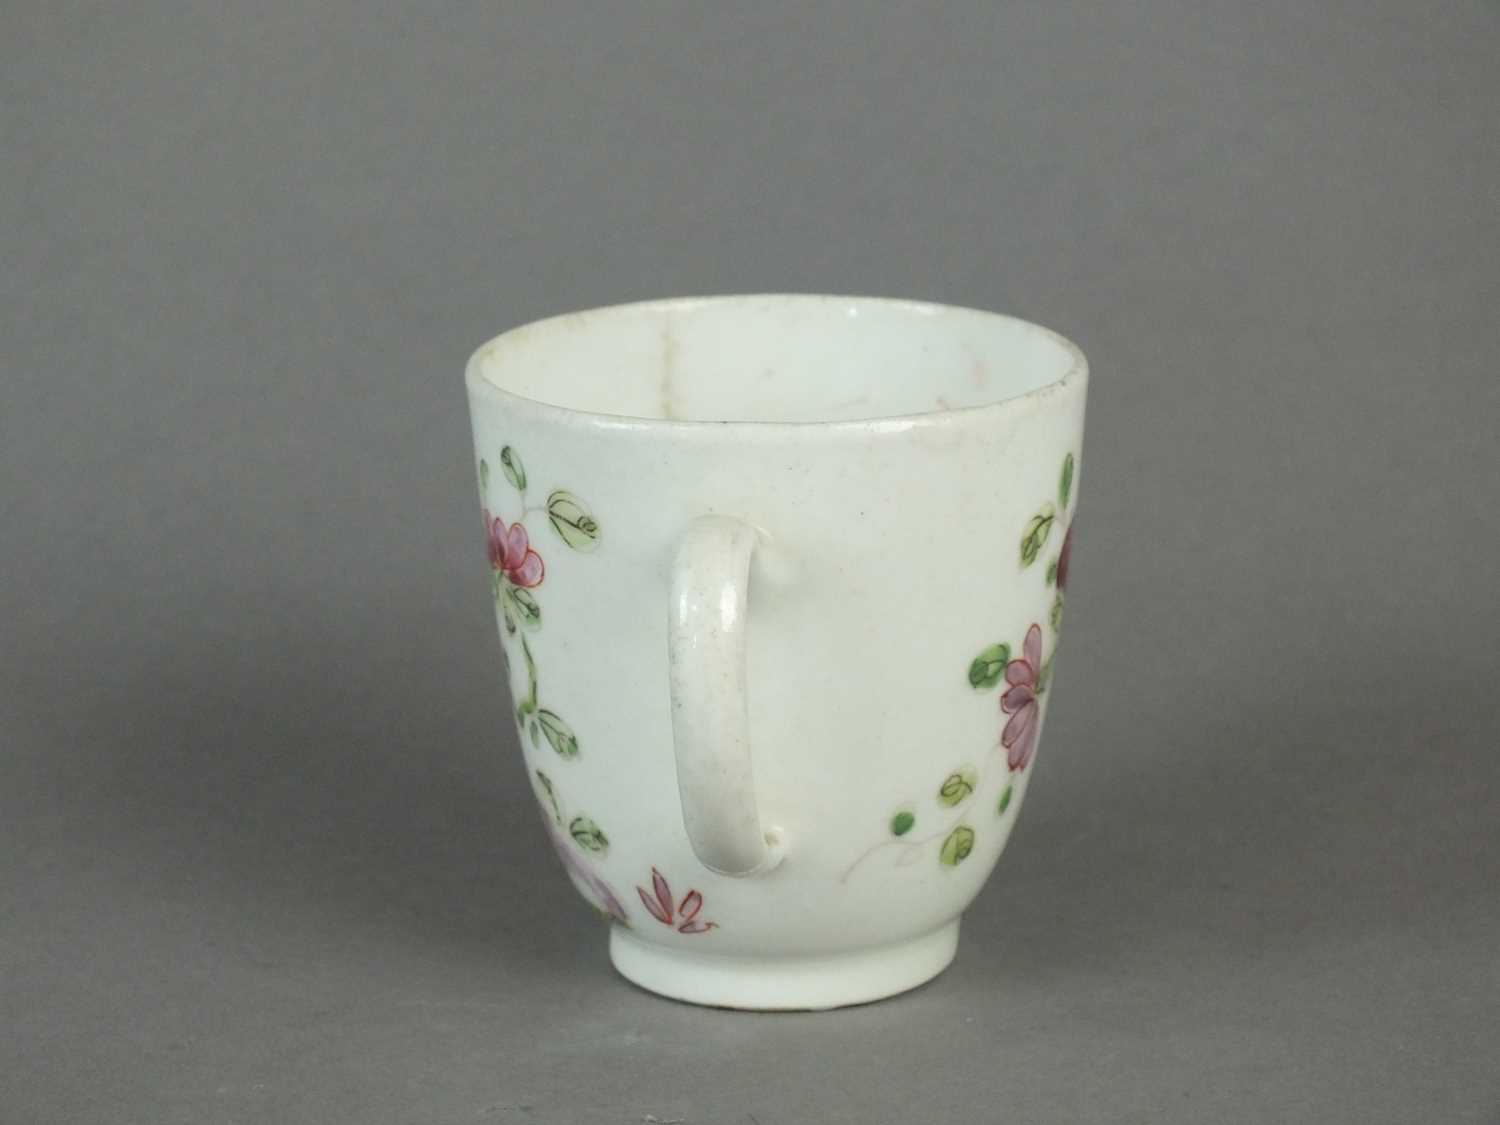 Worcester and Bow coffee cups, 18th century - Image 4 of 8